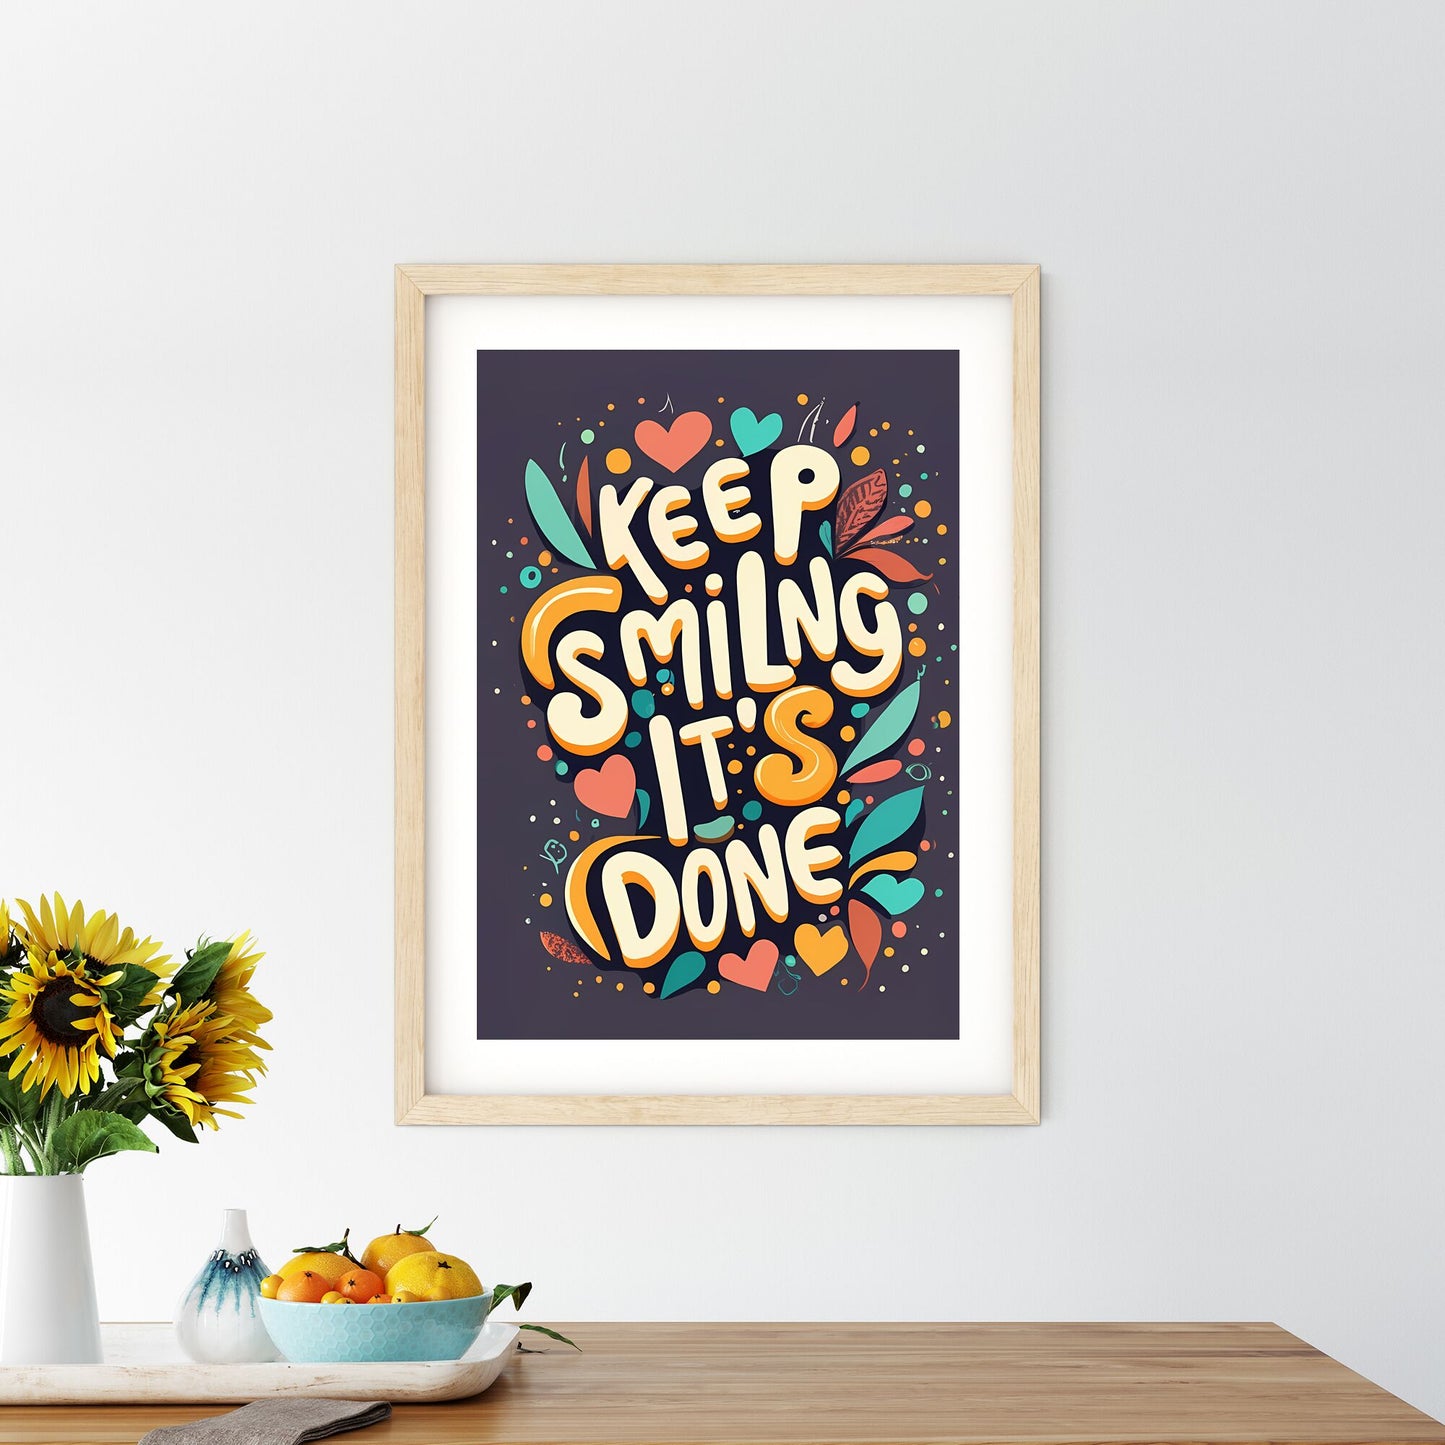 Keep Smiling, Its Done - A Colorful Text On A Purple Background Art Print Default Title